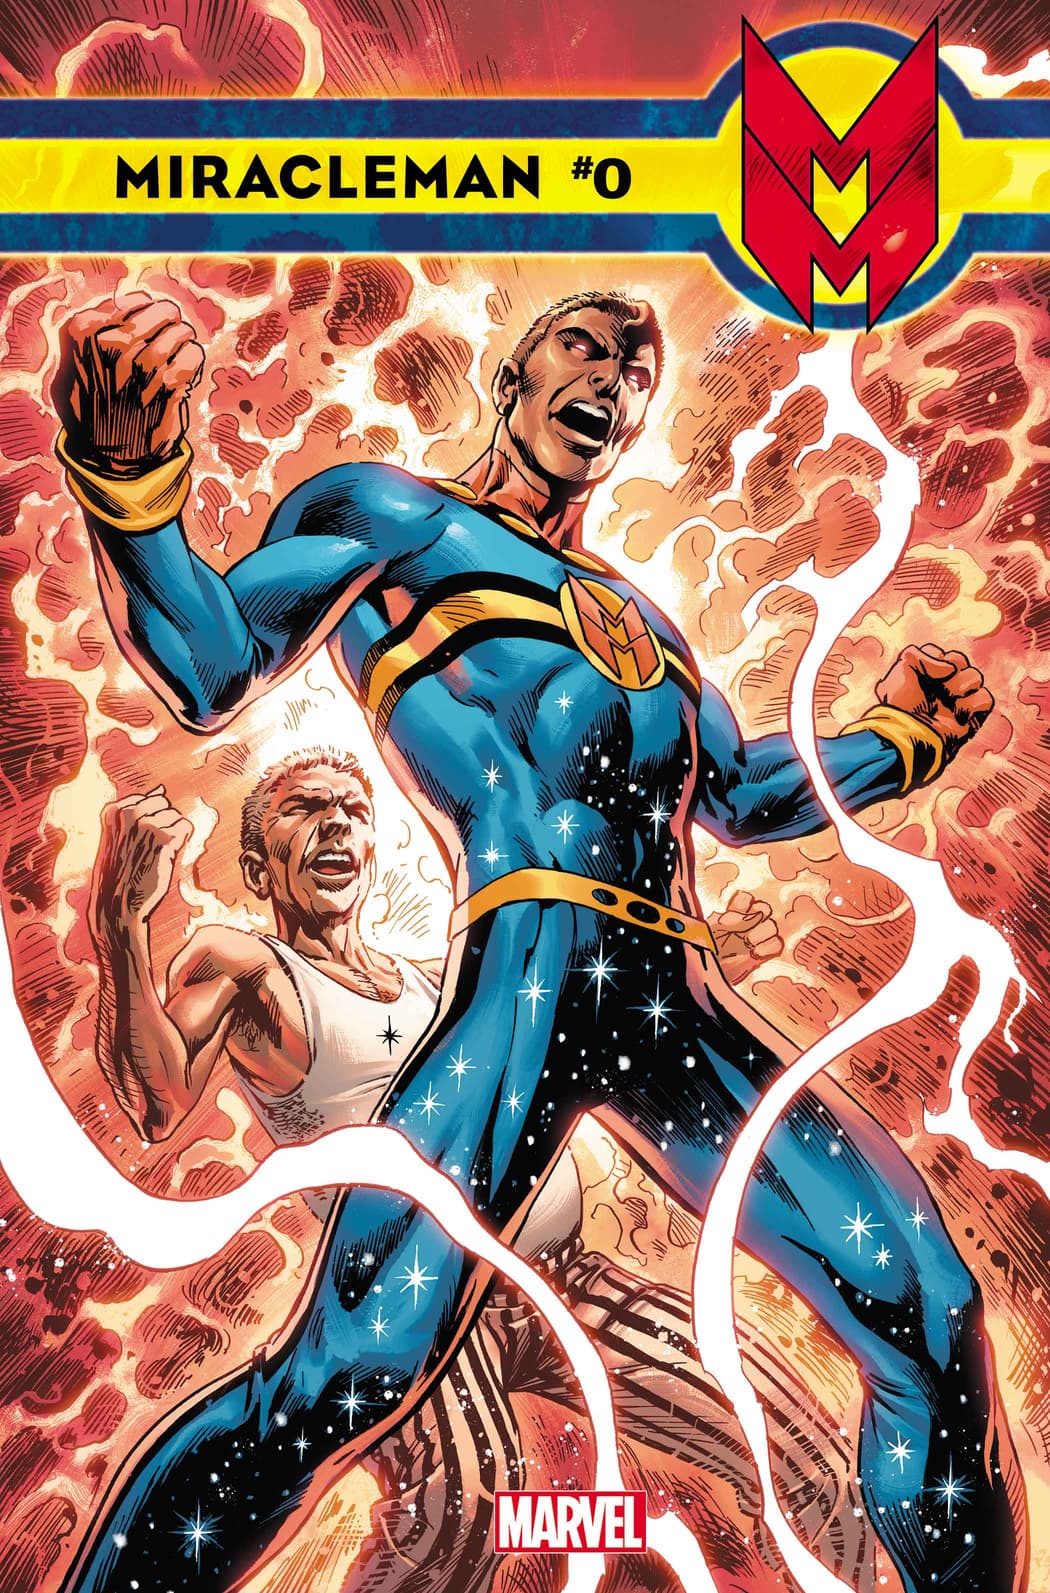 MIRACLEMAN #0 cover by Alan Davis